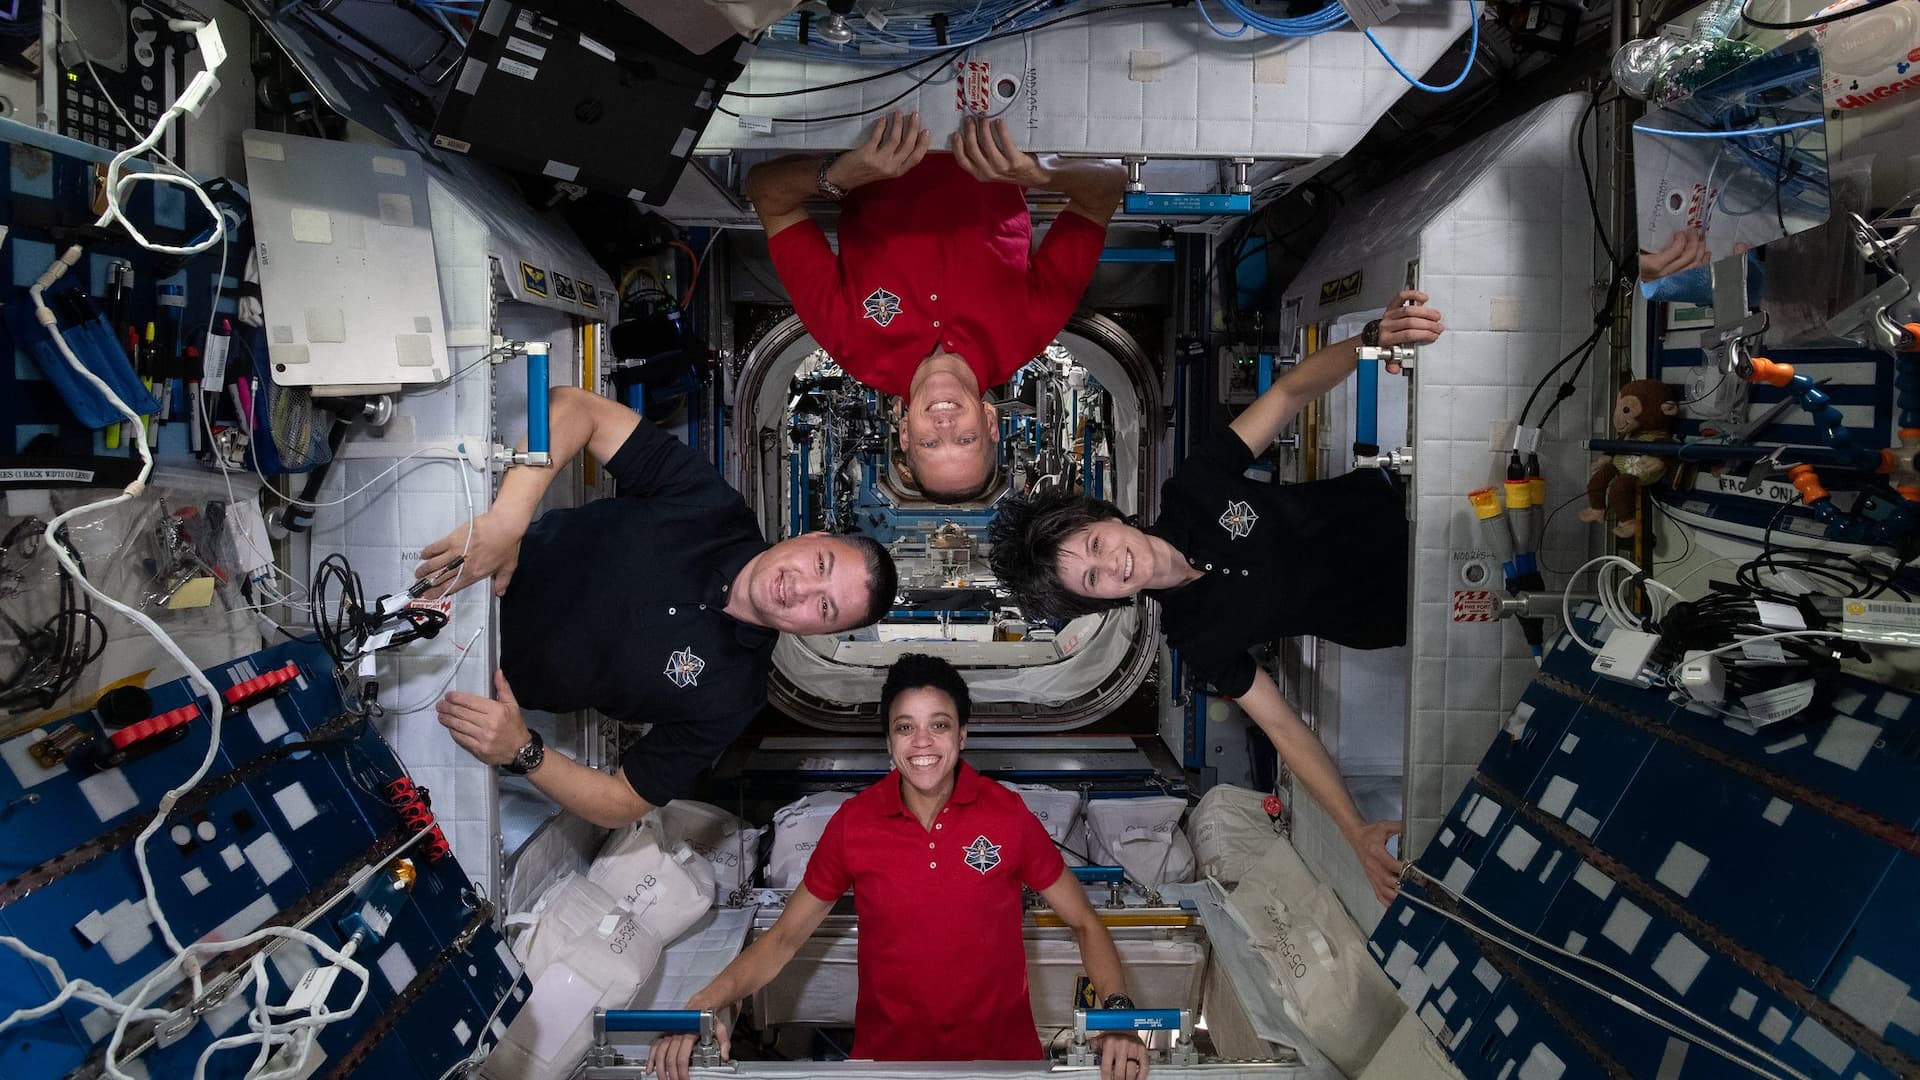 ASI - Astrosamantha has returned to Earth